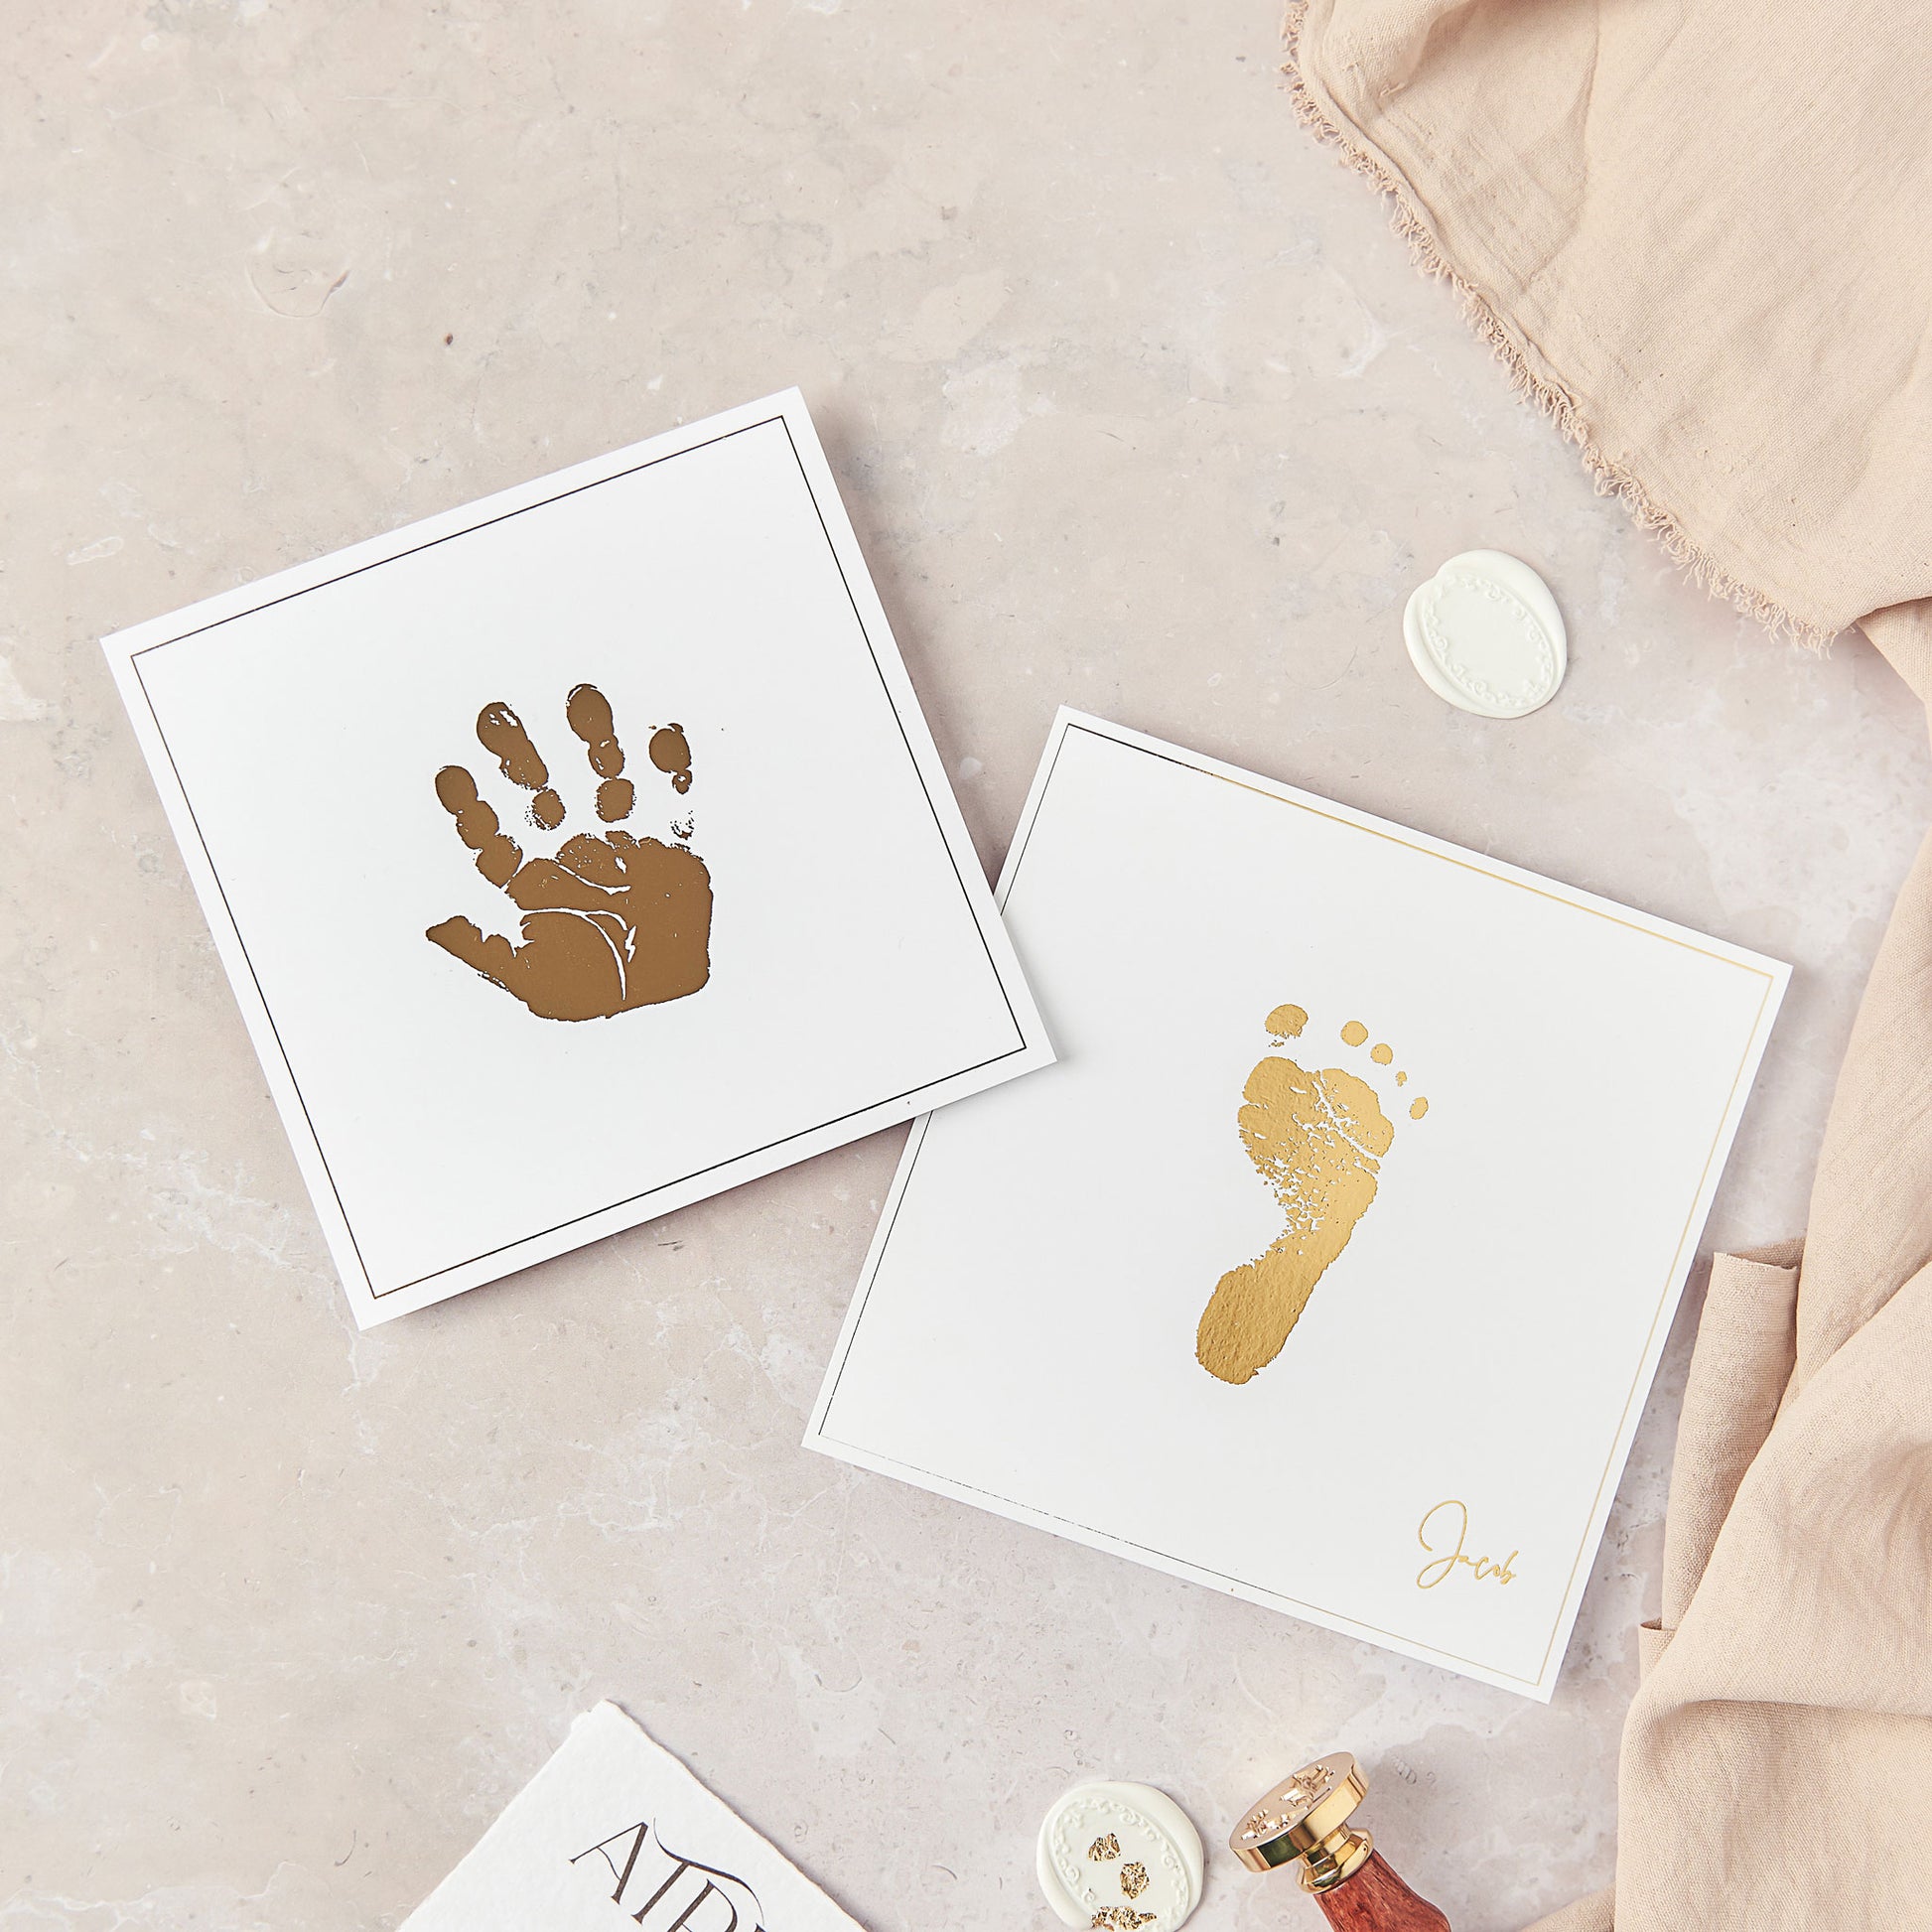 This photograph shows 2 personalised keepsakes, both at 5 inches square. To the left of the photograph is a foil hand print keepsake, created in gold foil on to white card stock. To the right is a seperate foil keepsake this time showing a gold foiled baby footprint on white cardstock. The foil footprint is fused centrally within the 5 inch square white cardstock. Within the bottom right corner of this print it is further personalised with the baby's name "Jacob" in a gold foil script font.